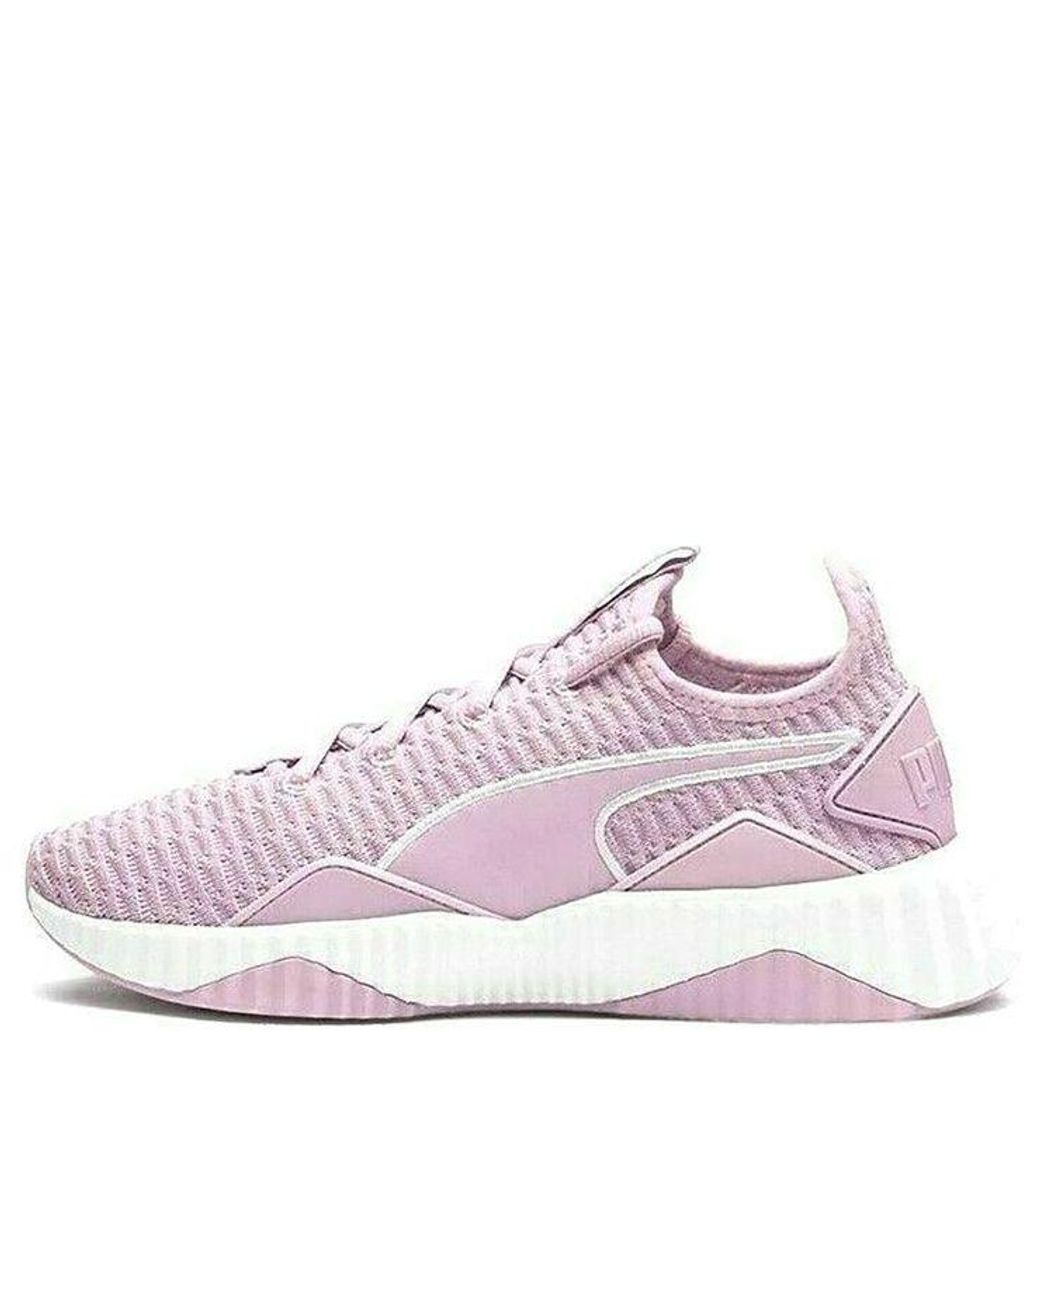 PUMA Defy Low Top Running Shoes Purple/white | Lyst